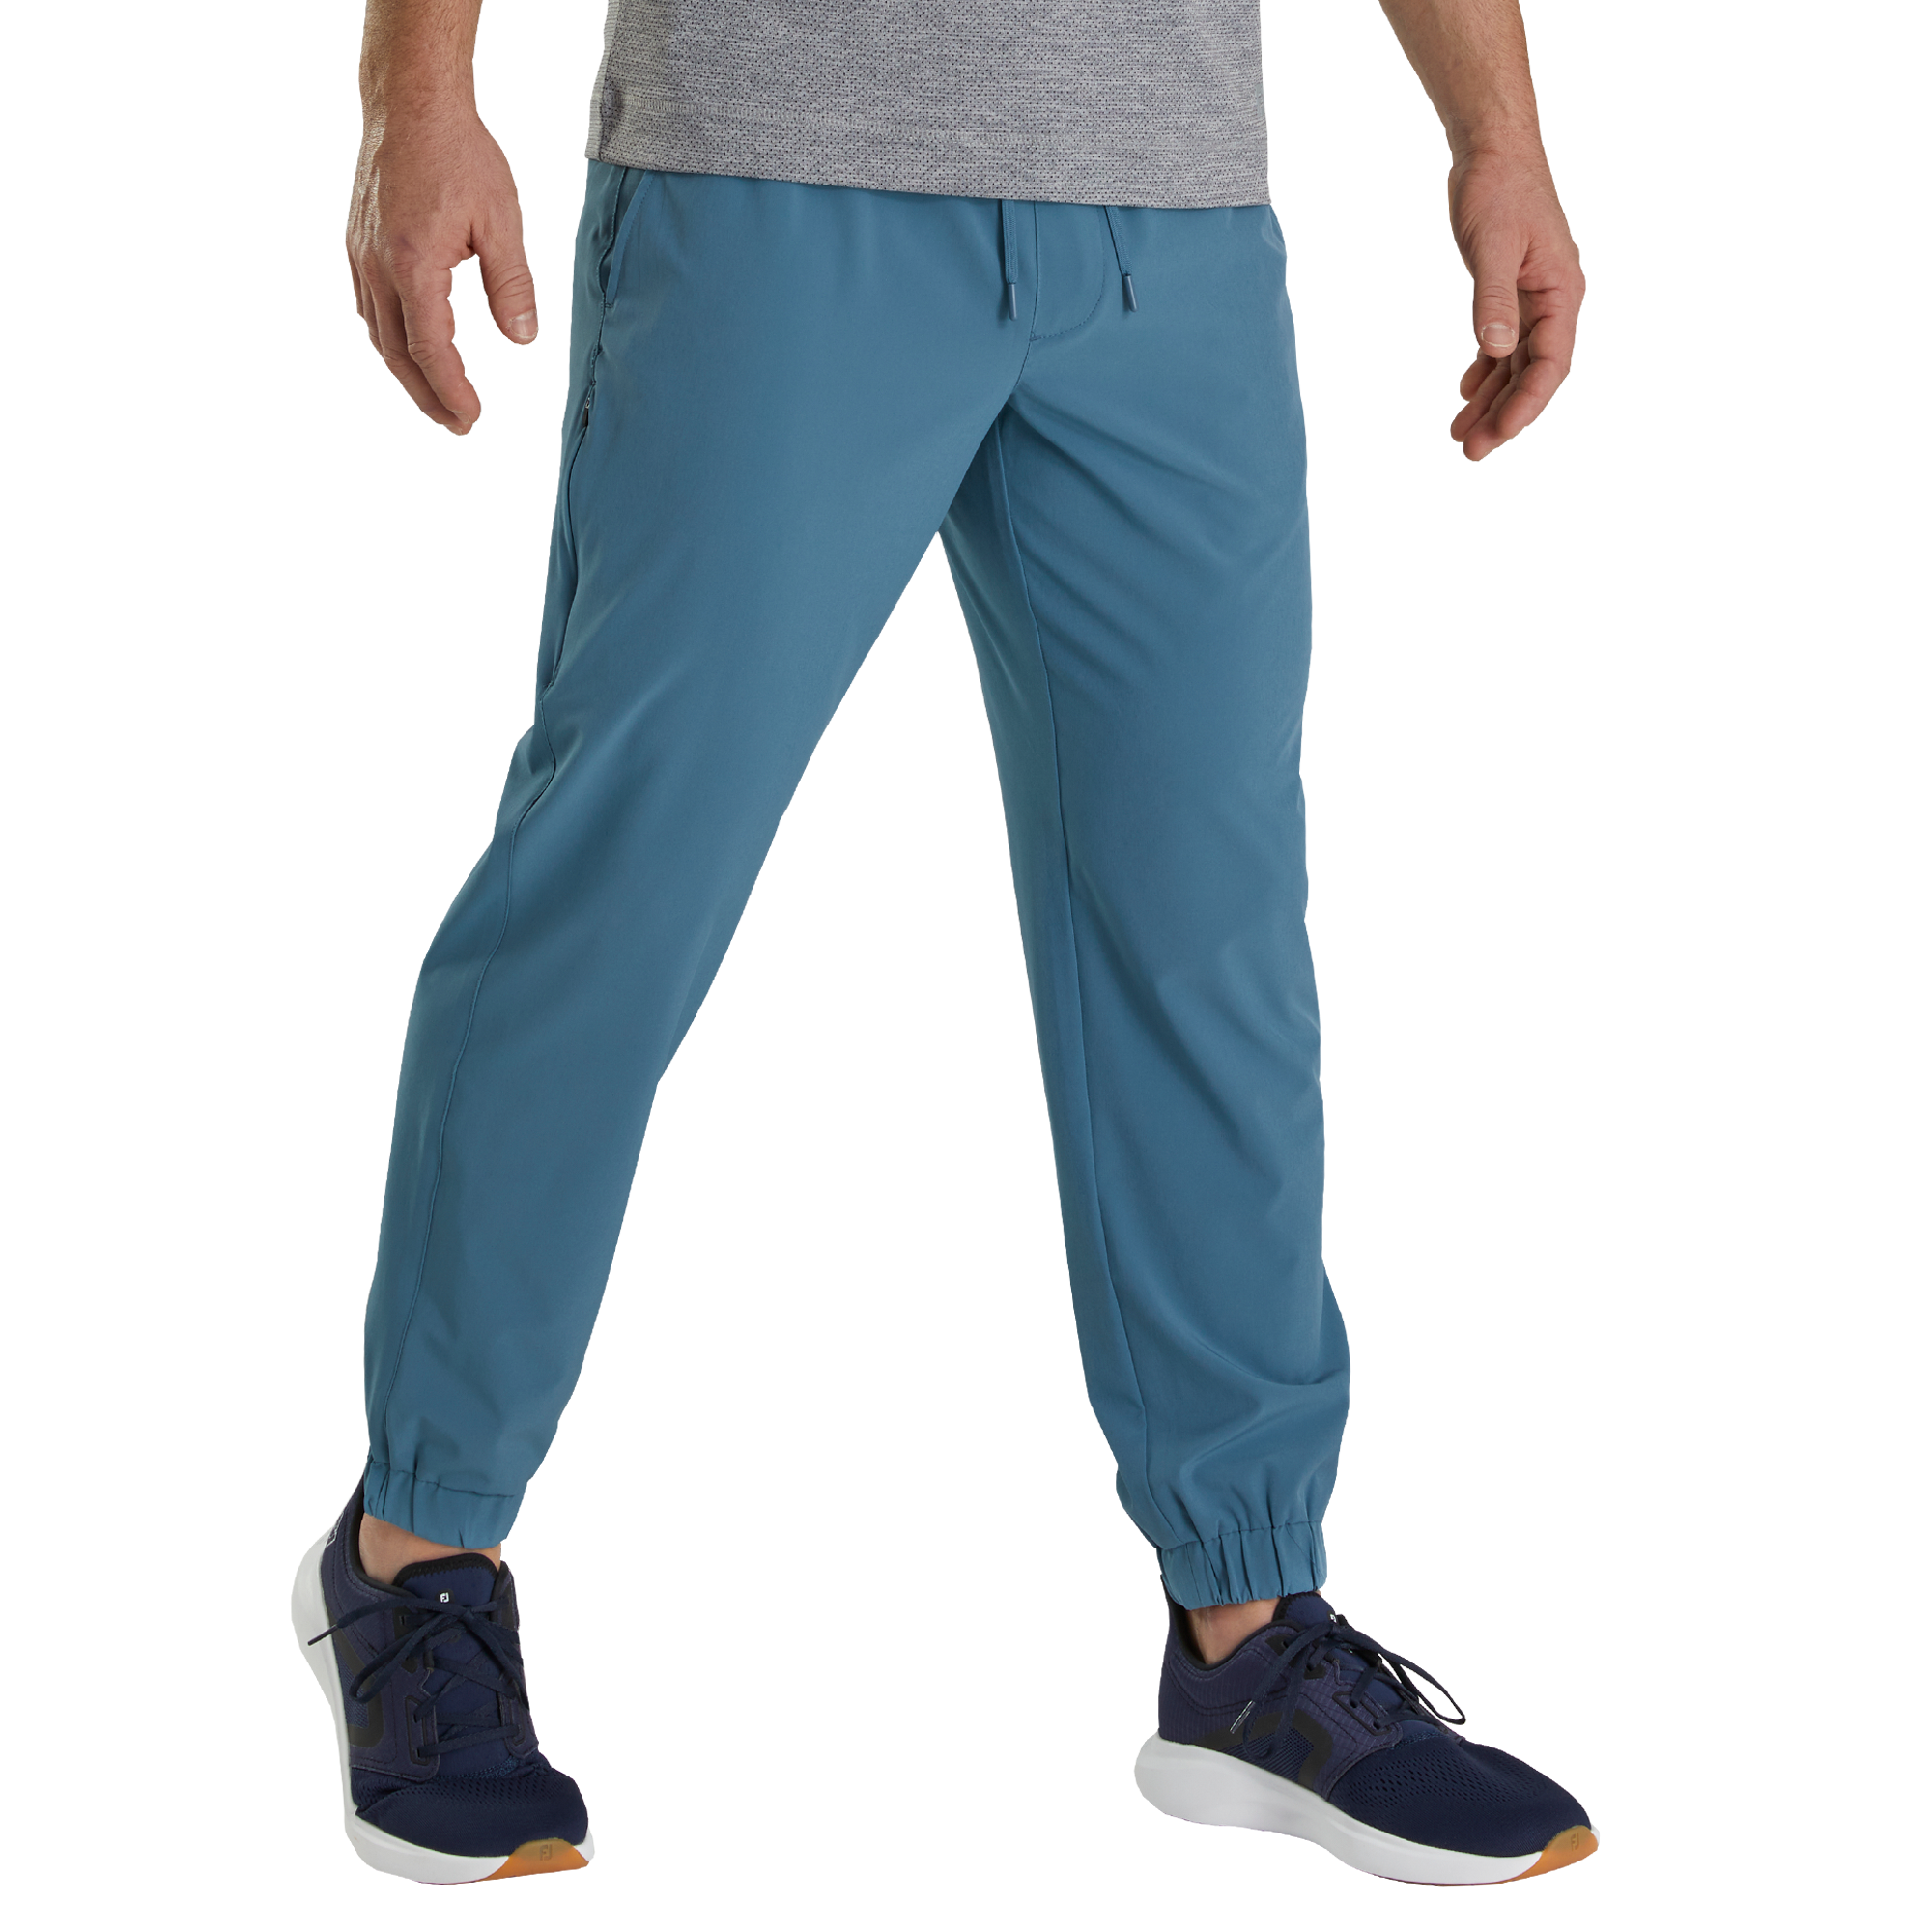 Angbater Men's Stretch Comfort Golf Pants Slim Fit Lightweight Outdoor Work  Casual Trousers with Pockets